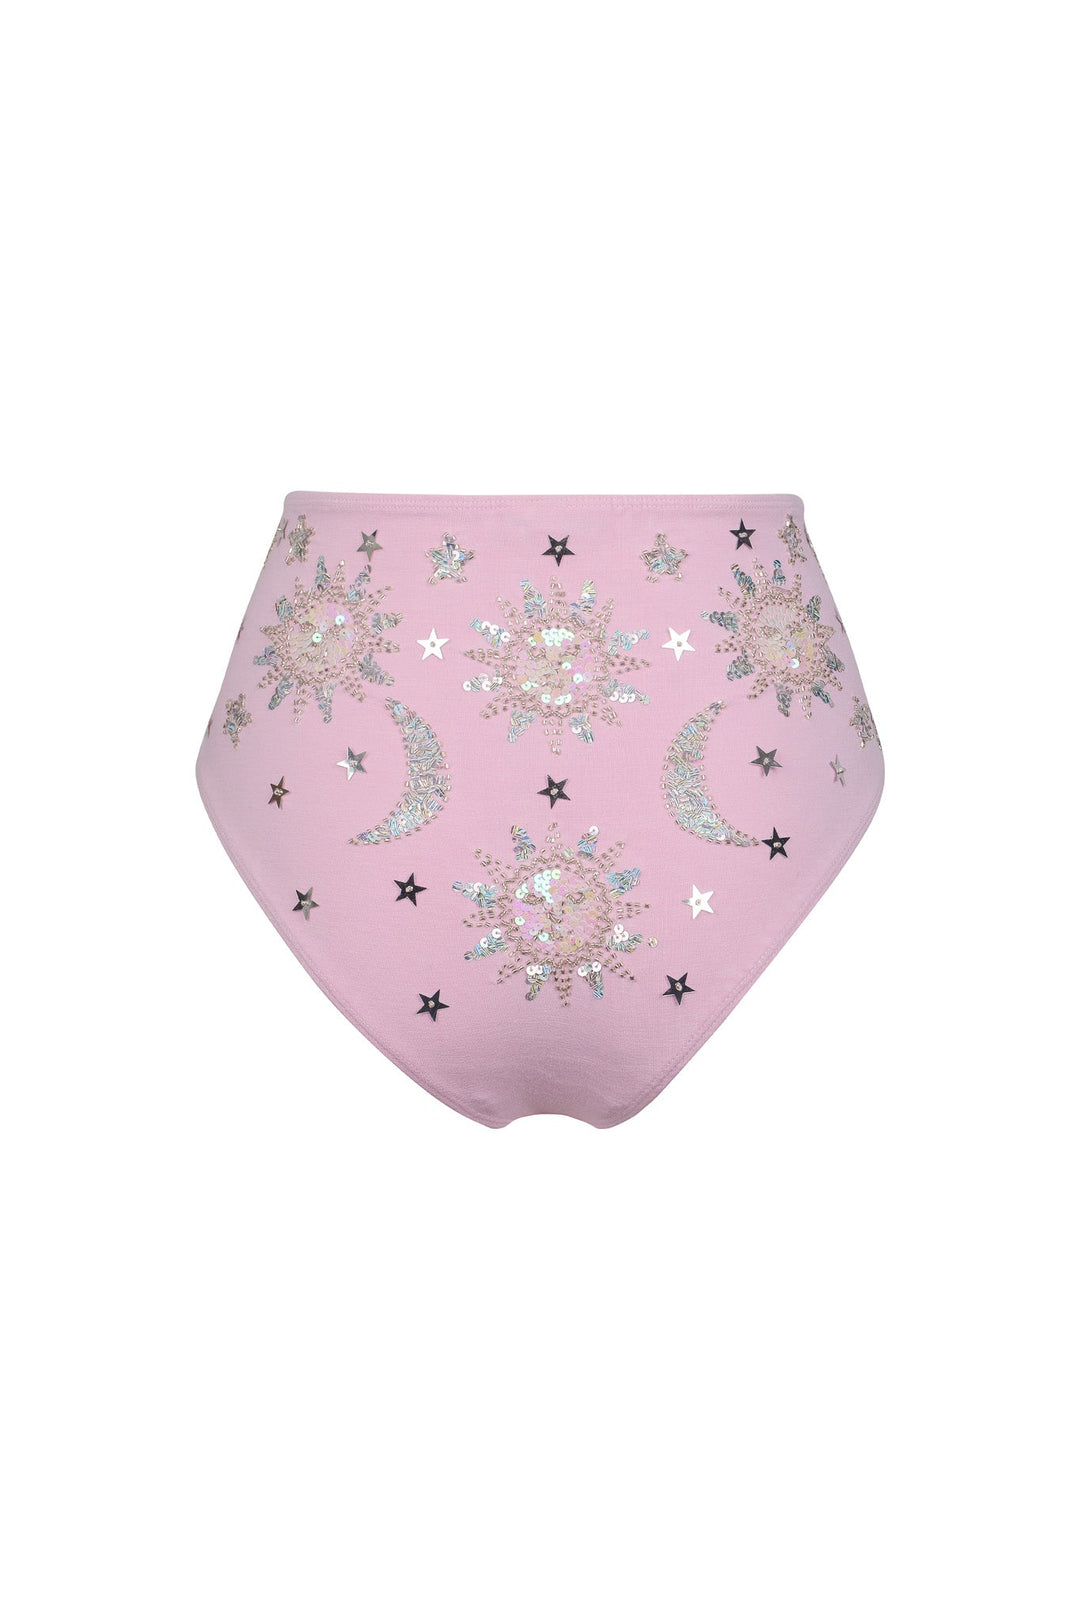 STELLA SEQUIN SPARKLE BLOOMERS - PINK/SILVER - Her Pony